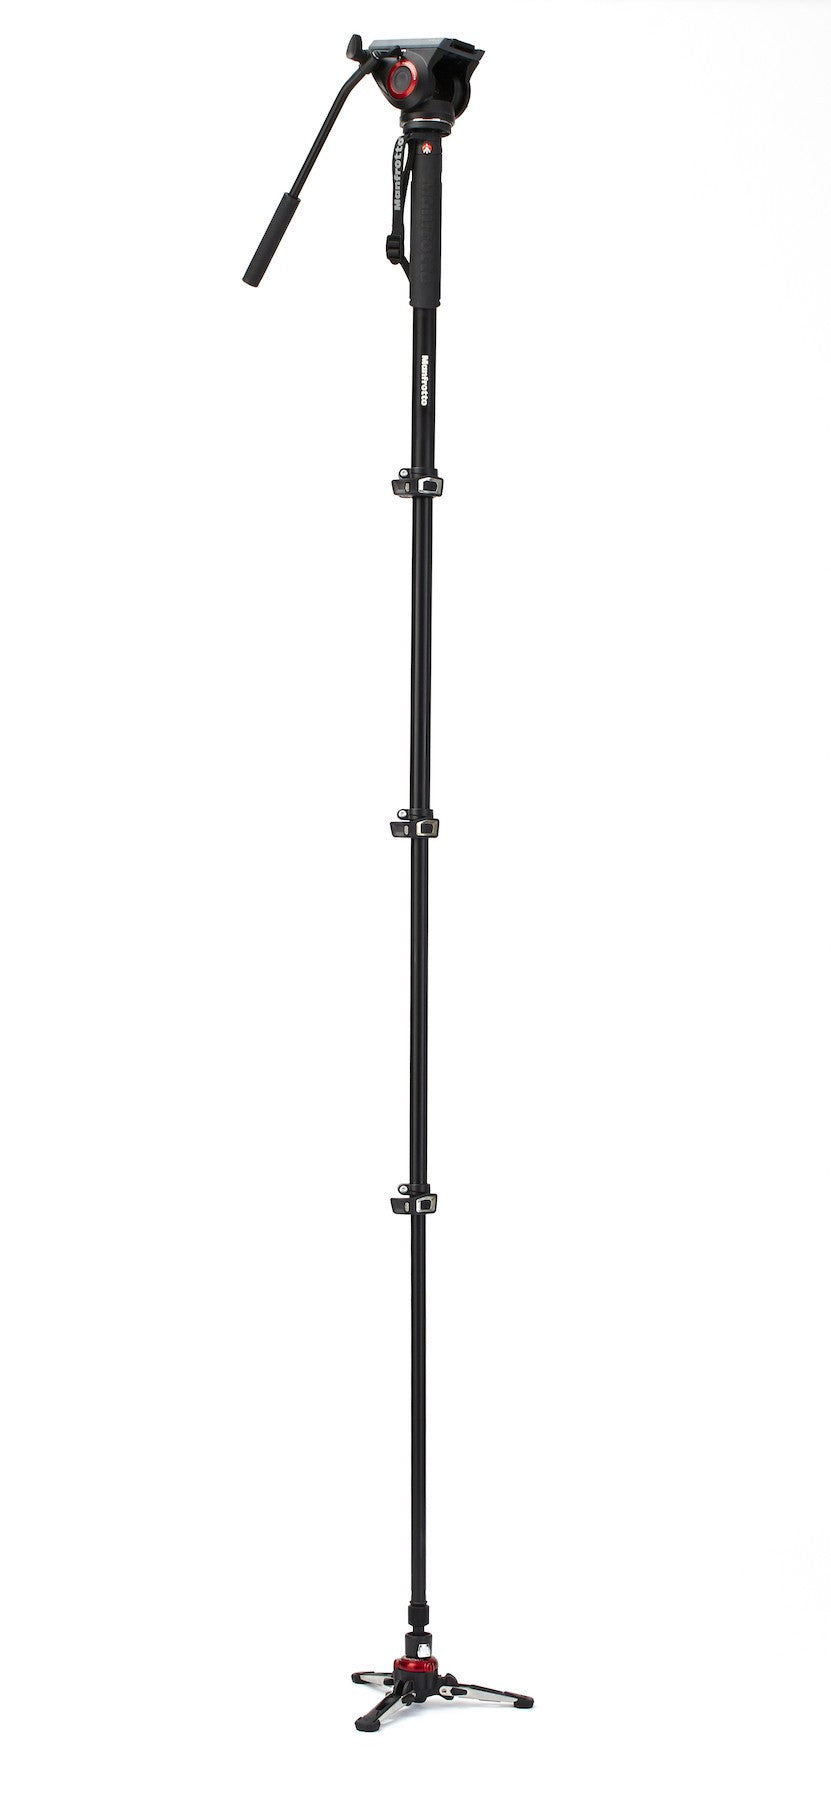 Manfrotto Video MVMXPRO500US Xpro Aluminum Video Monopod with 500 Series Video Head, tripods video monopods, Manfrotto - Pictureline  - 1